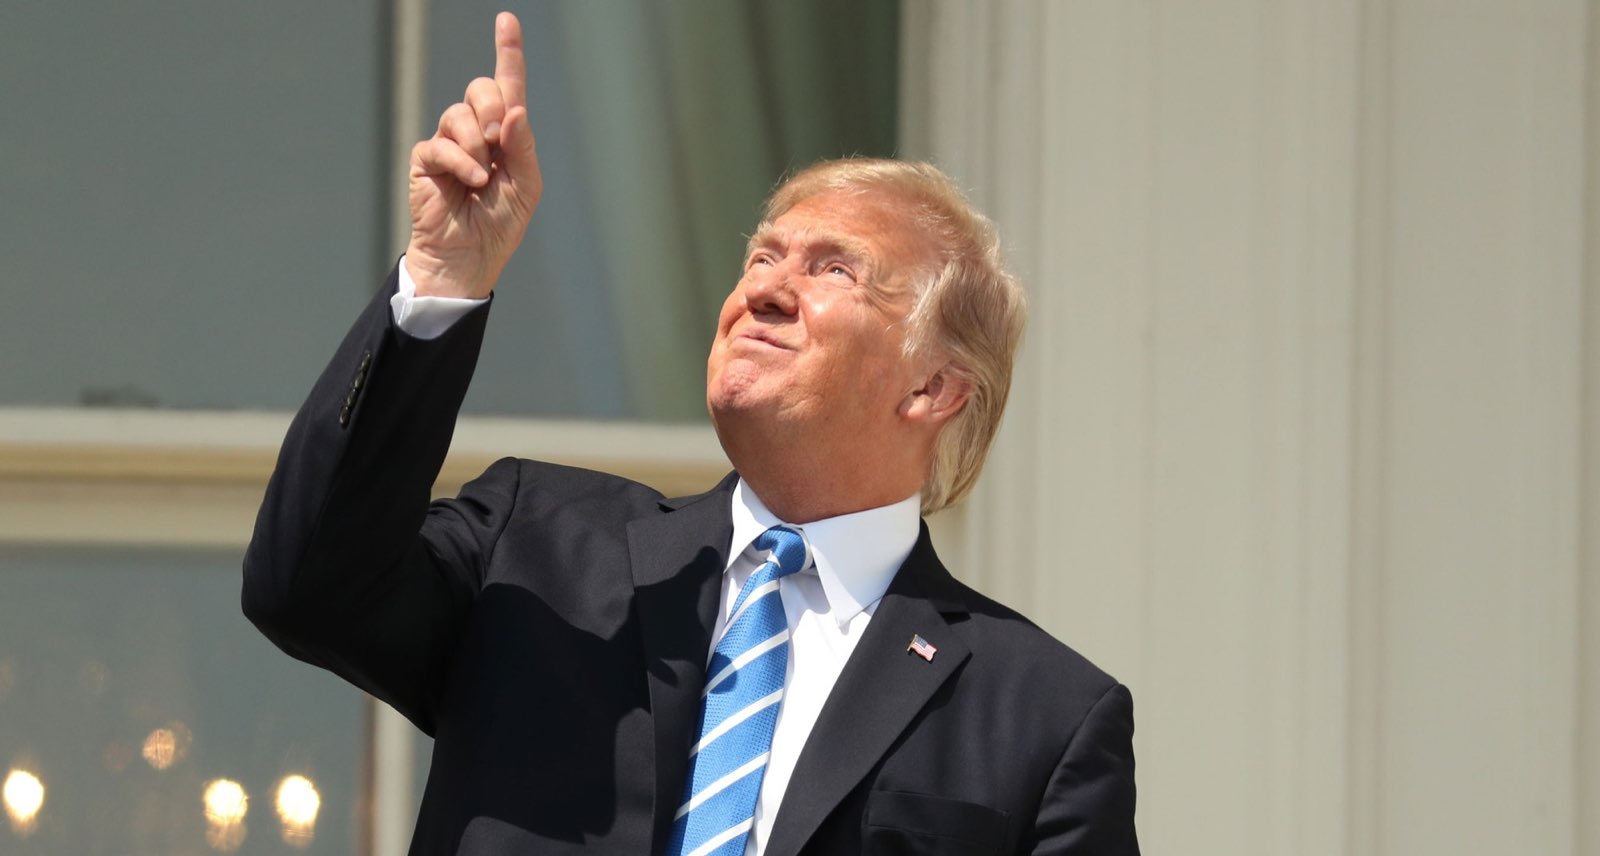 Trump looked at the solar eclipse without protection